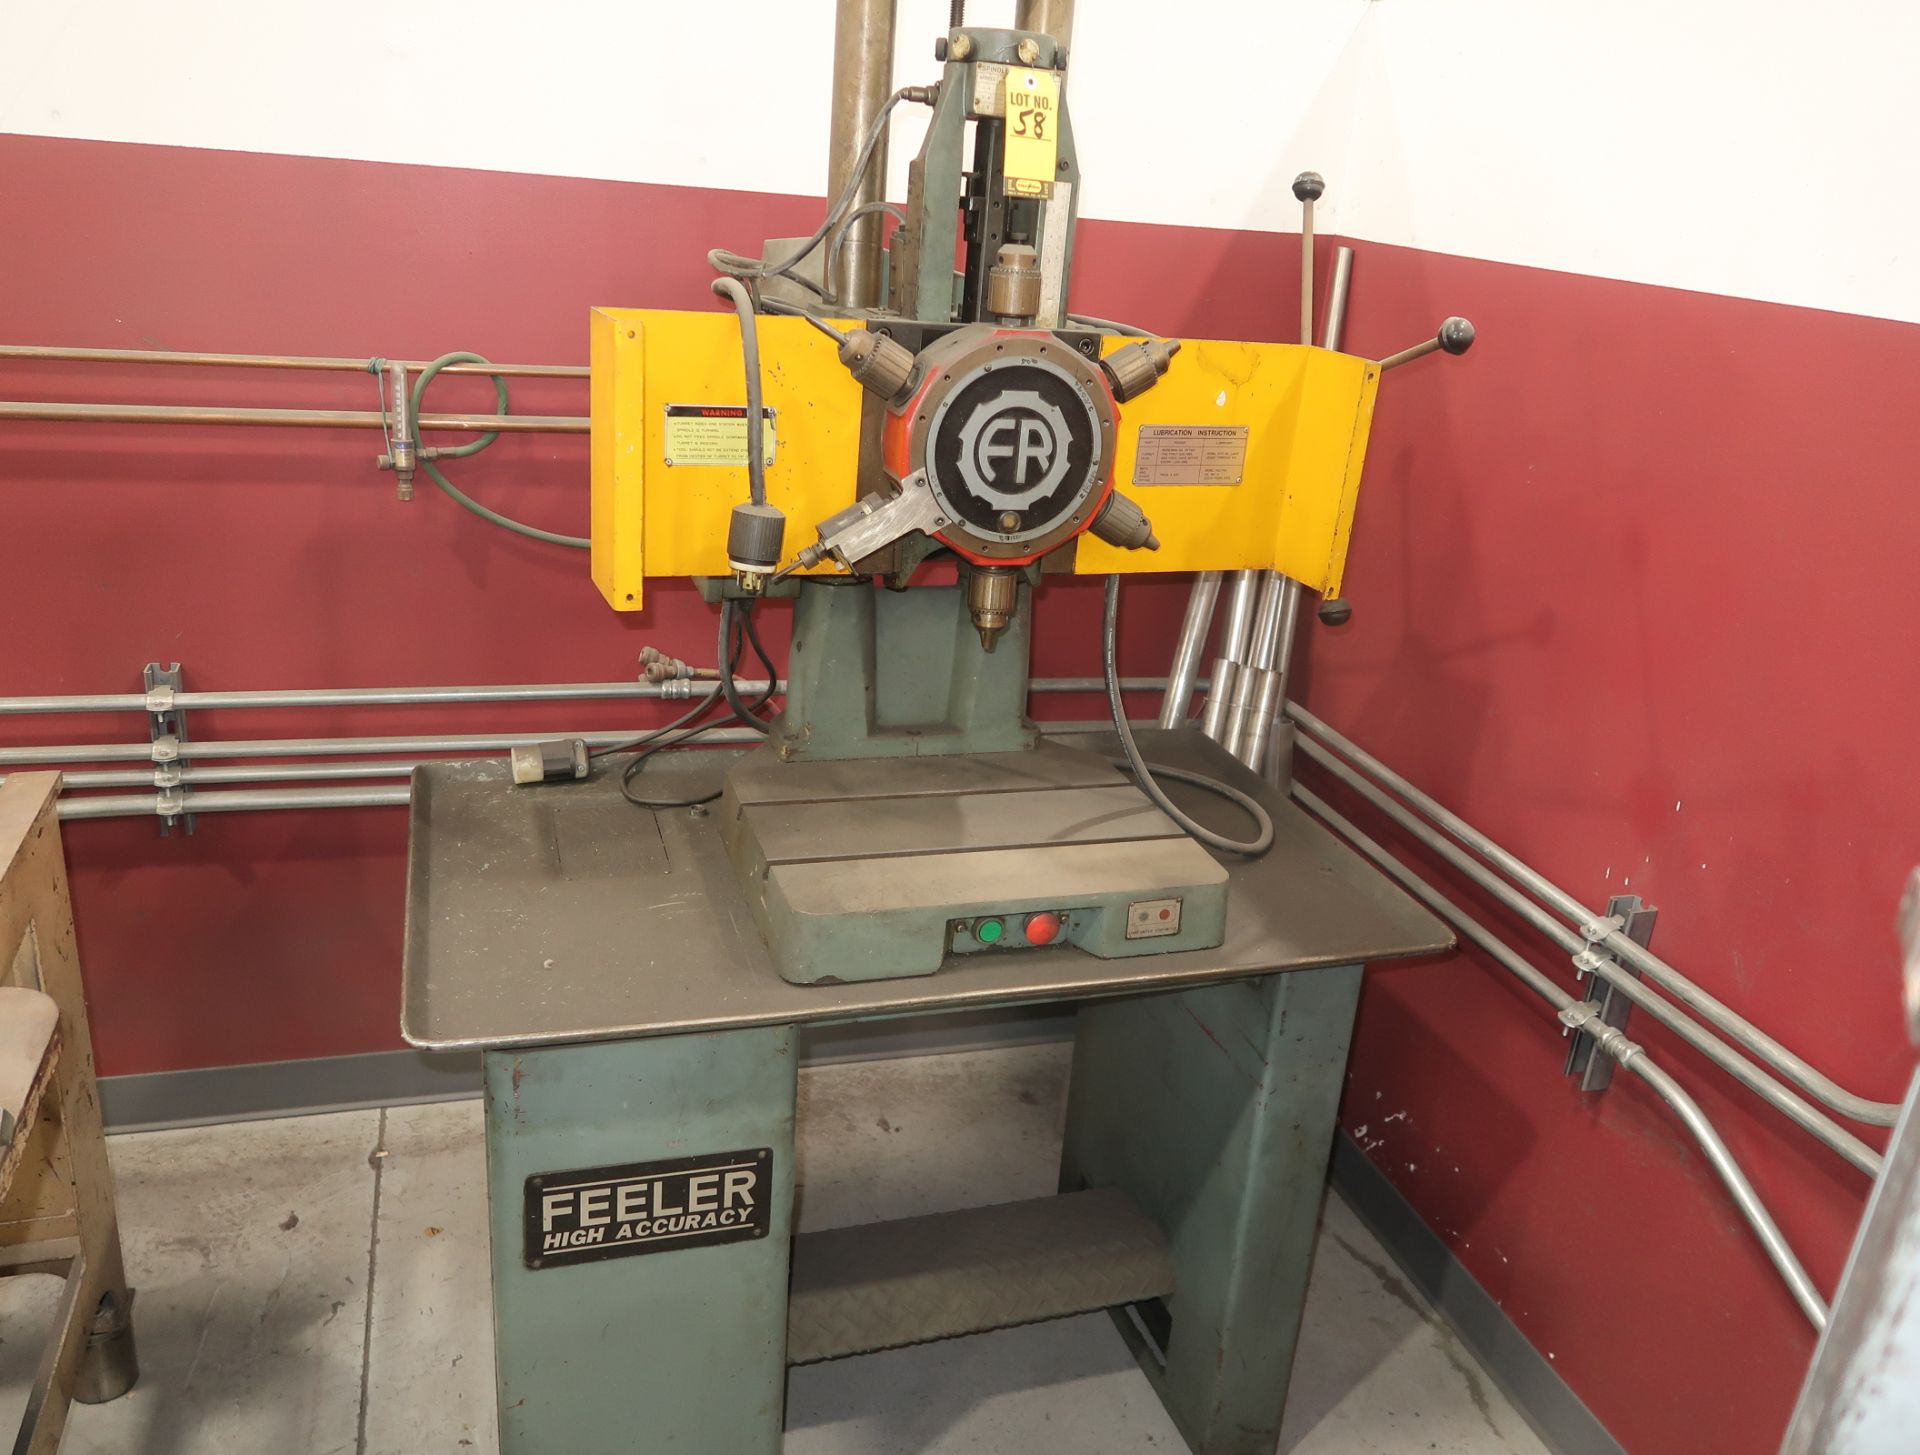 FEELER HIGH ACCURACY DRILLING MACHINE 3 PHASE MDL. PC-12